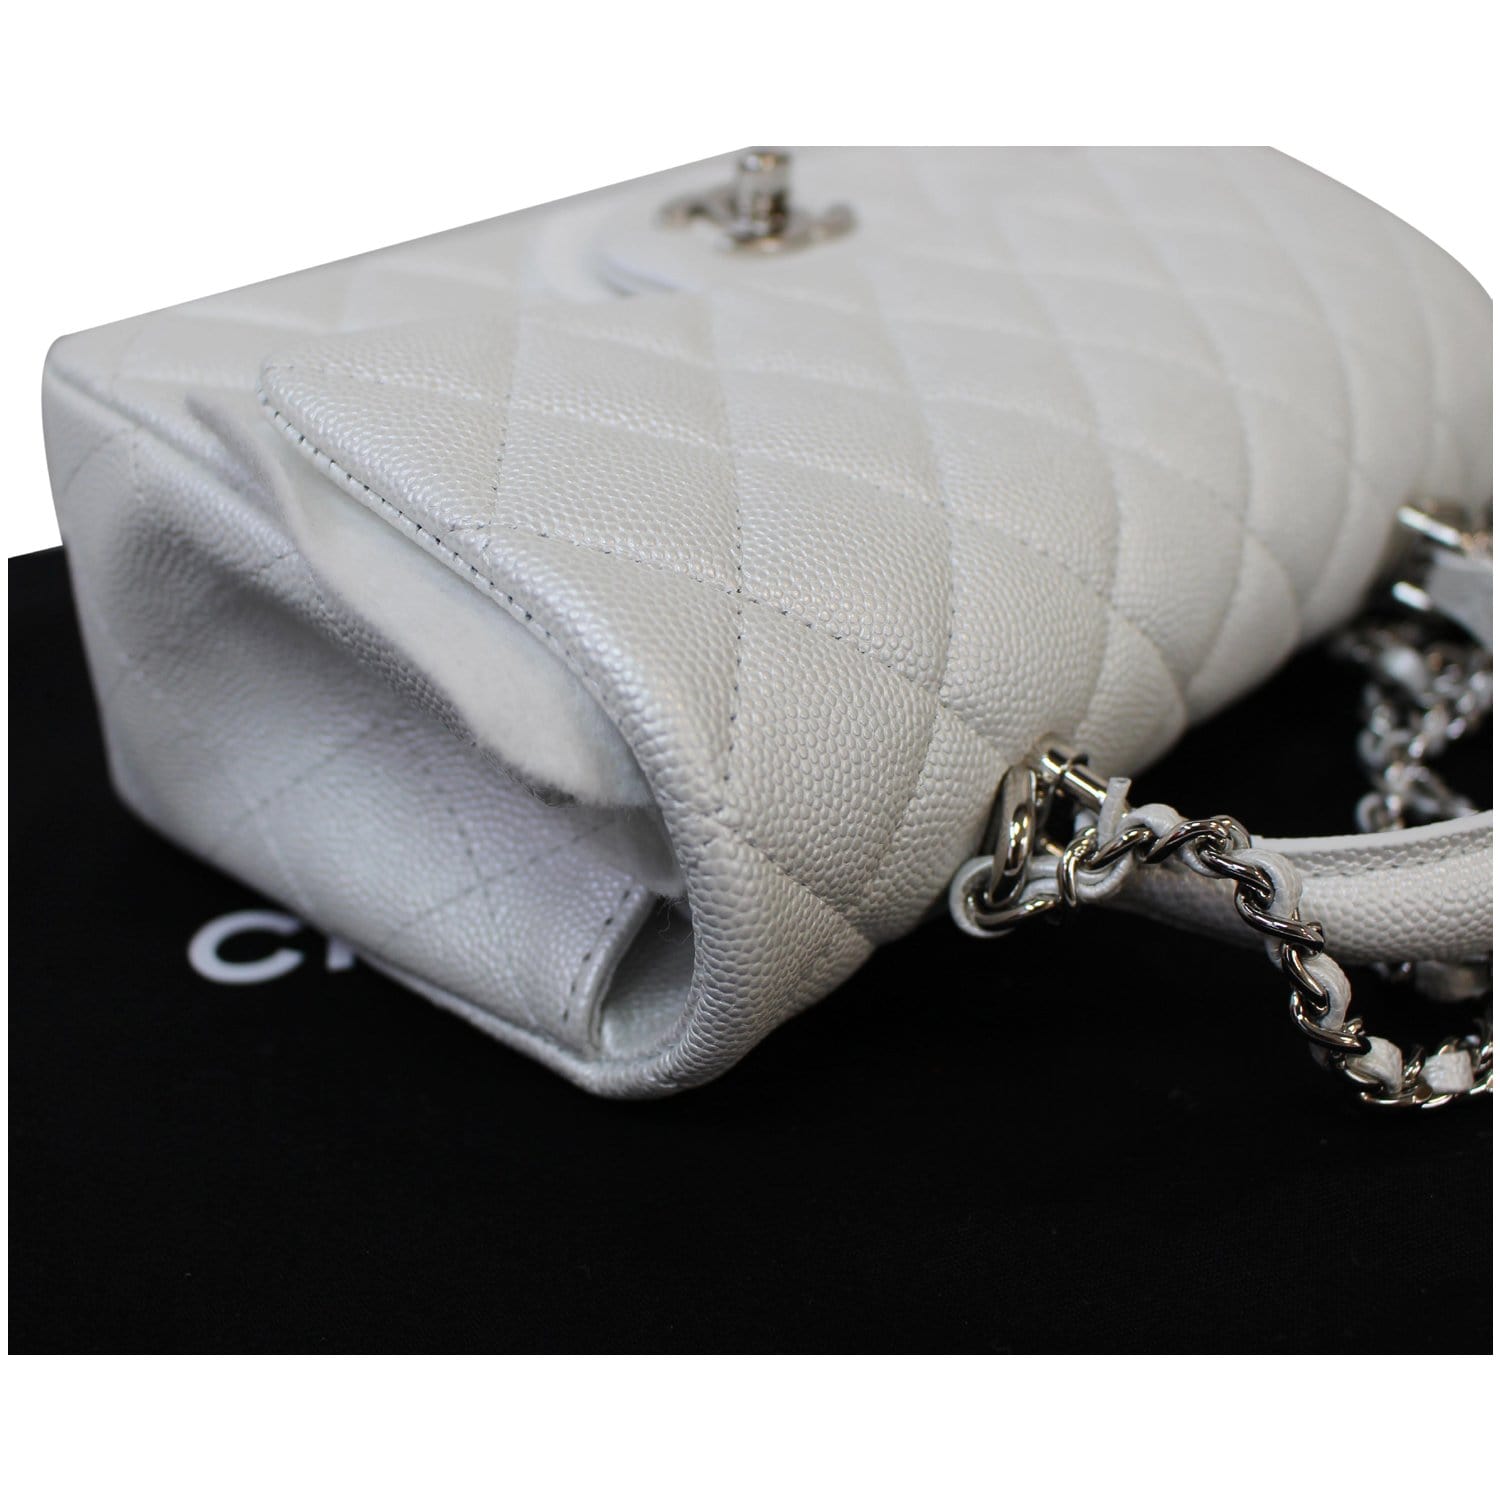 [NFS] Chanel micro / mini belt bag in white caviar leather